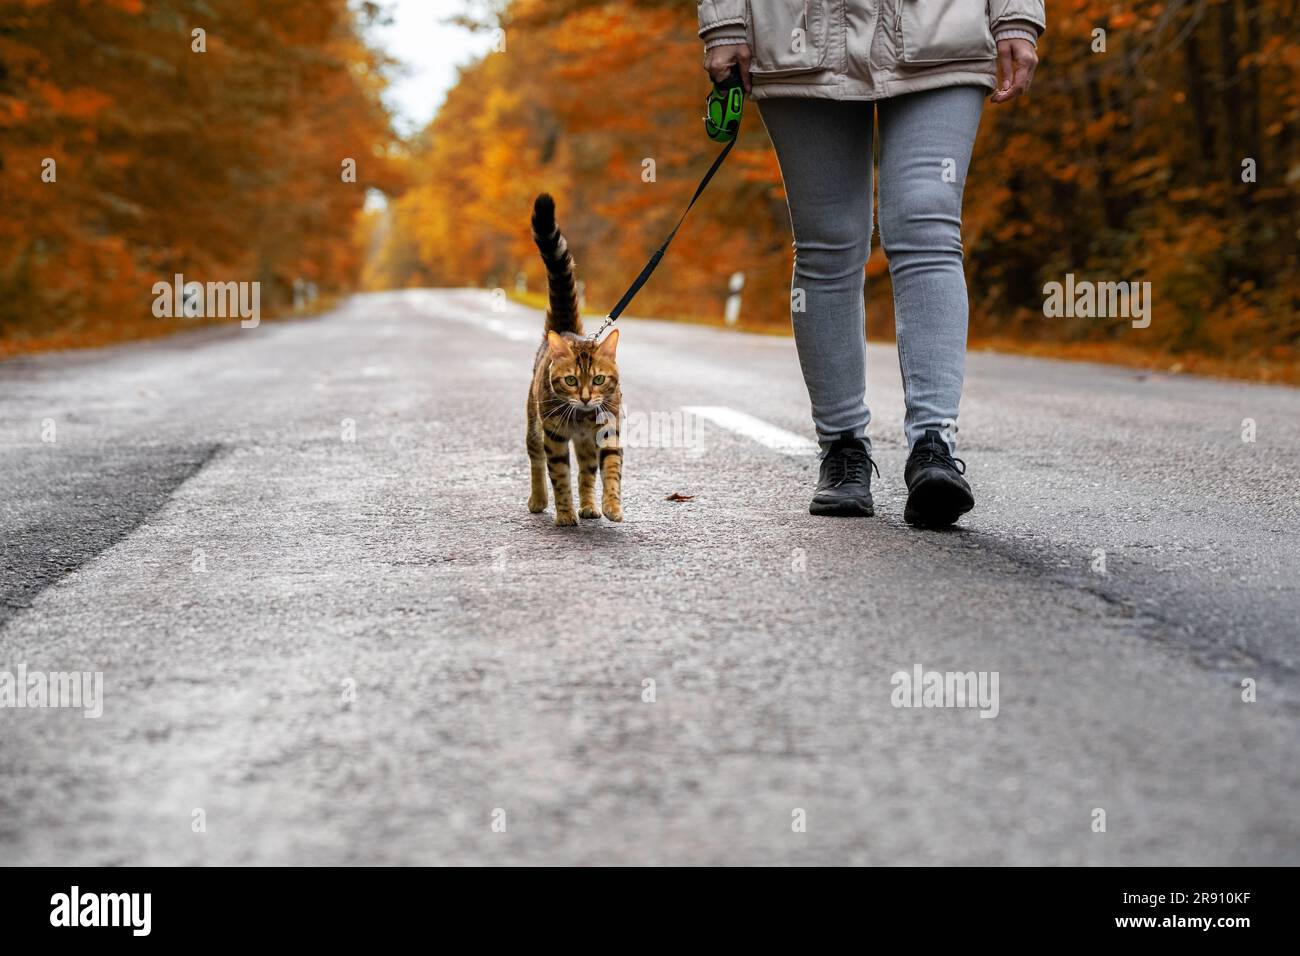 A woman with a Bengal cat on a leash walking along the road in the forest. Stock Photo